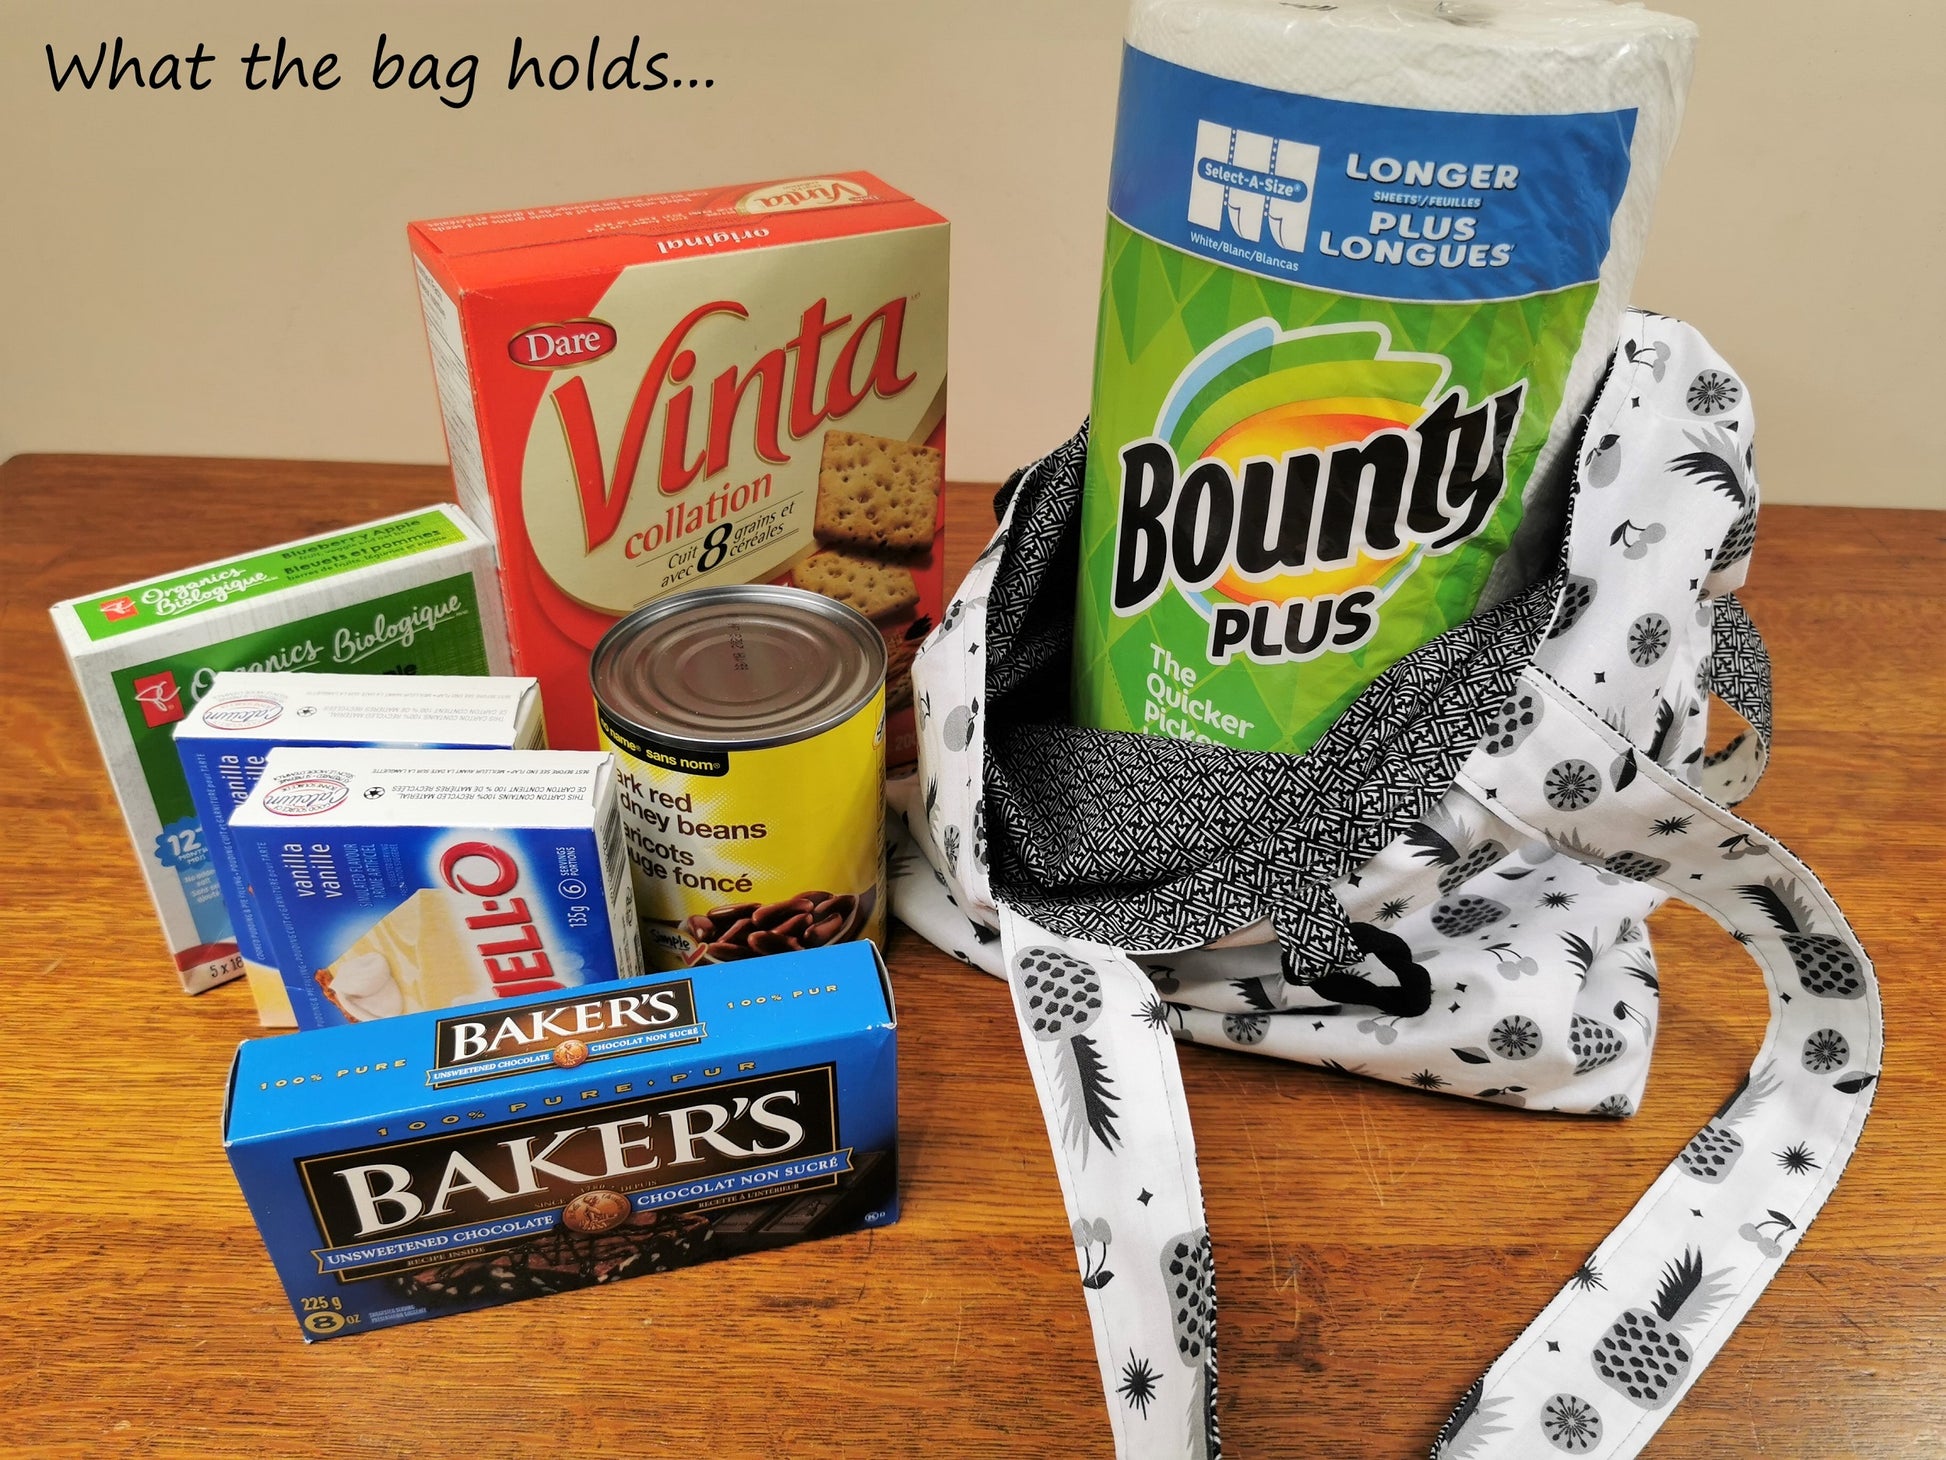 Image shows that the bag holds the following grocery items: Large roll Bounty paper towels, box Vinta crackers, can of kidney beans, two boxes of Jello pudding mix, small box fruit snack bars, box of Bakers unsweetened chocolate squares.